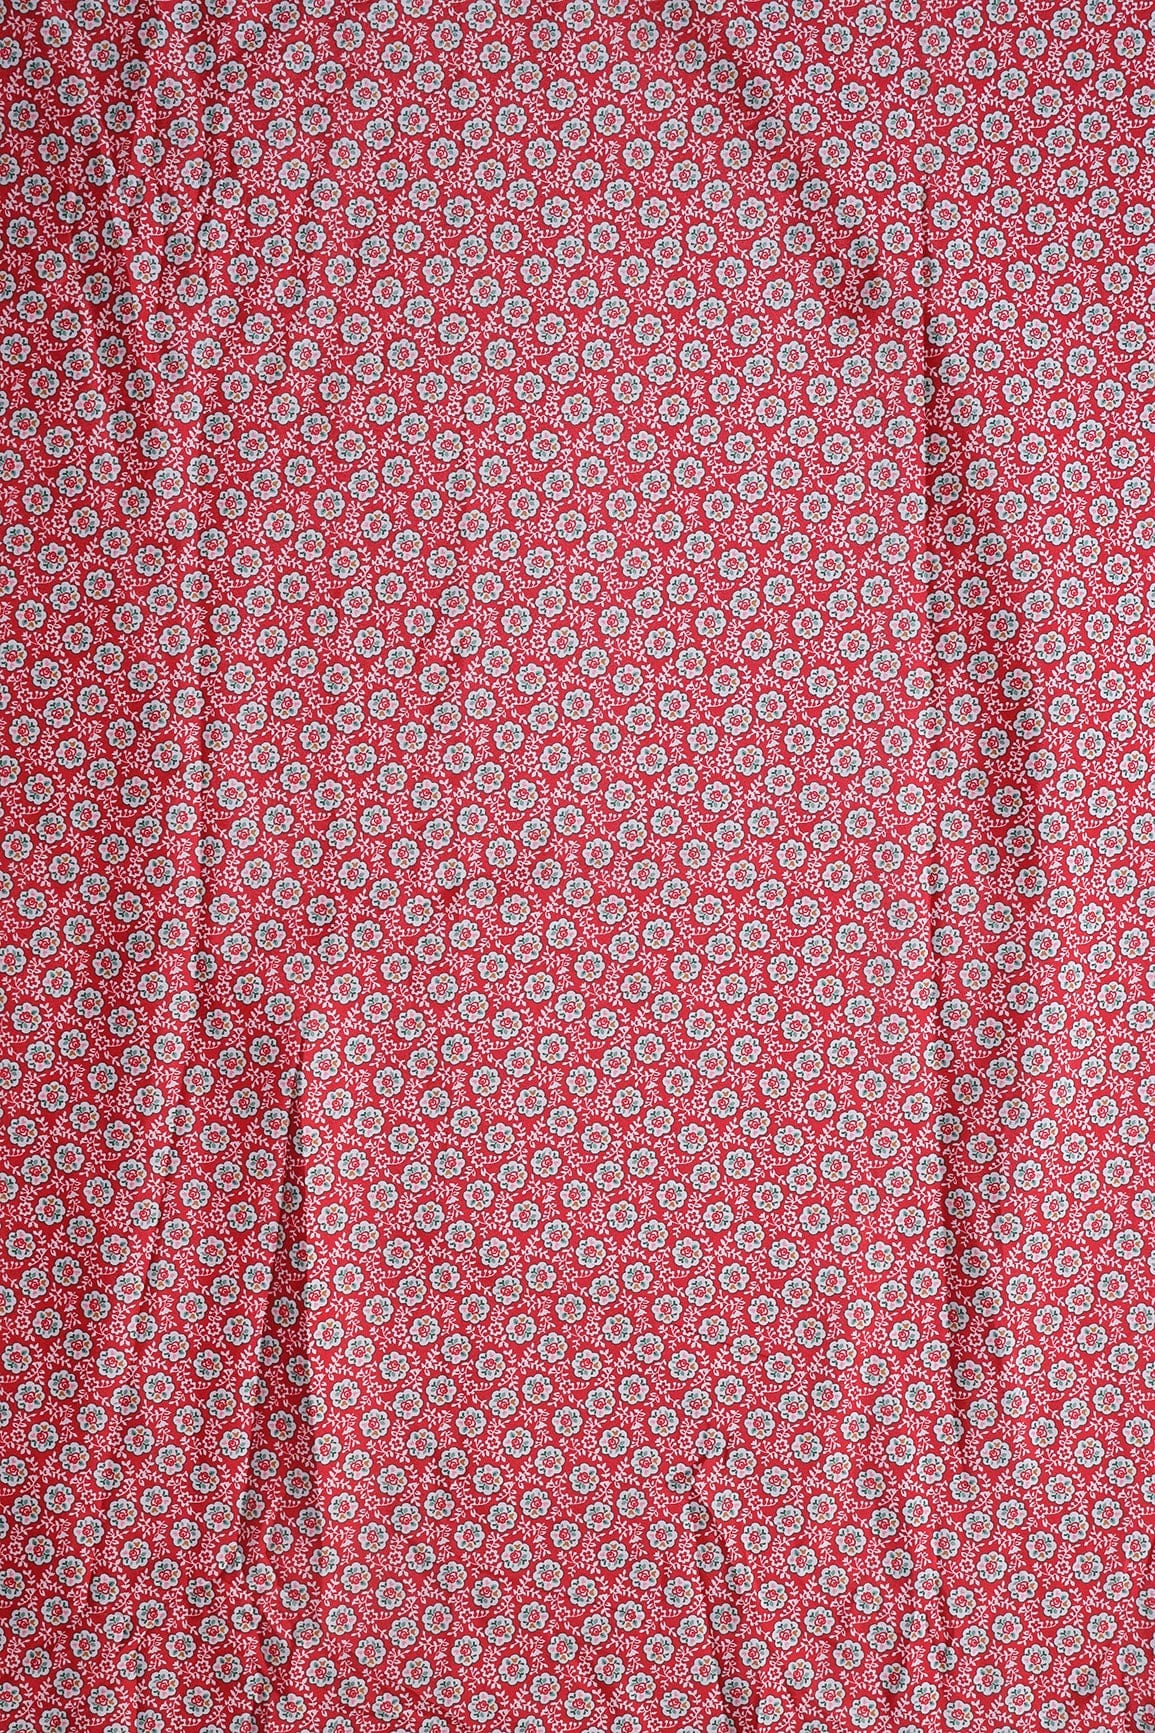 doeraa Prints White Small Floral Pattern Digital Print On Red French Crepe Fabric